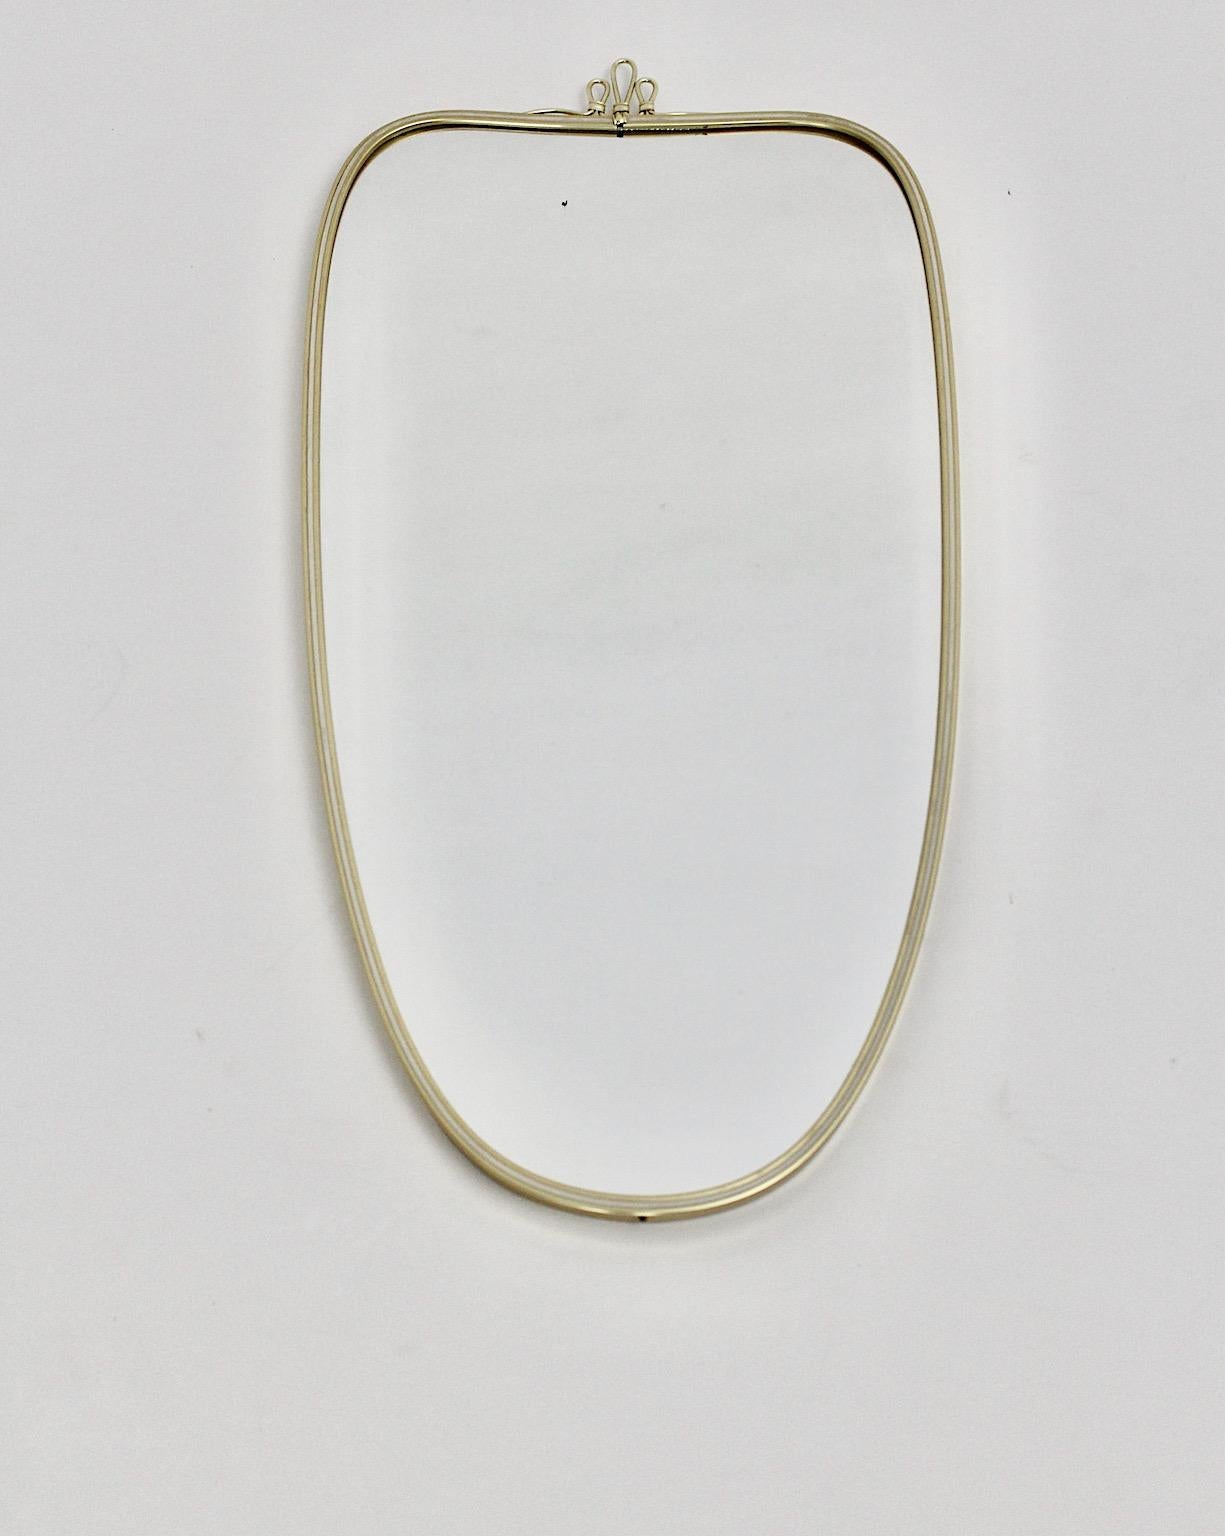 Modernist Vintage Oval Golden Metal Wall Mirror 1950s Italy In Good Condition For Sale In Vienna, AT